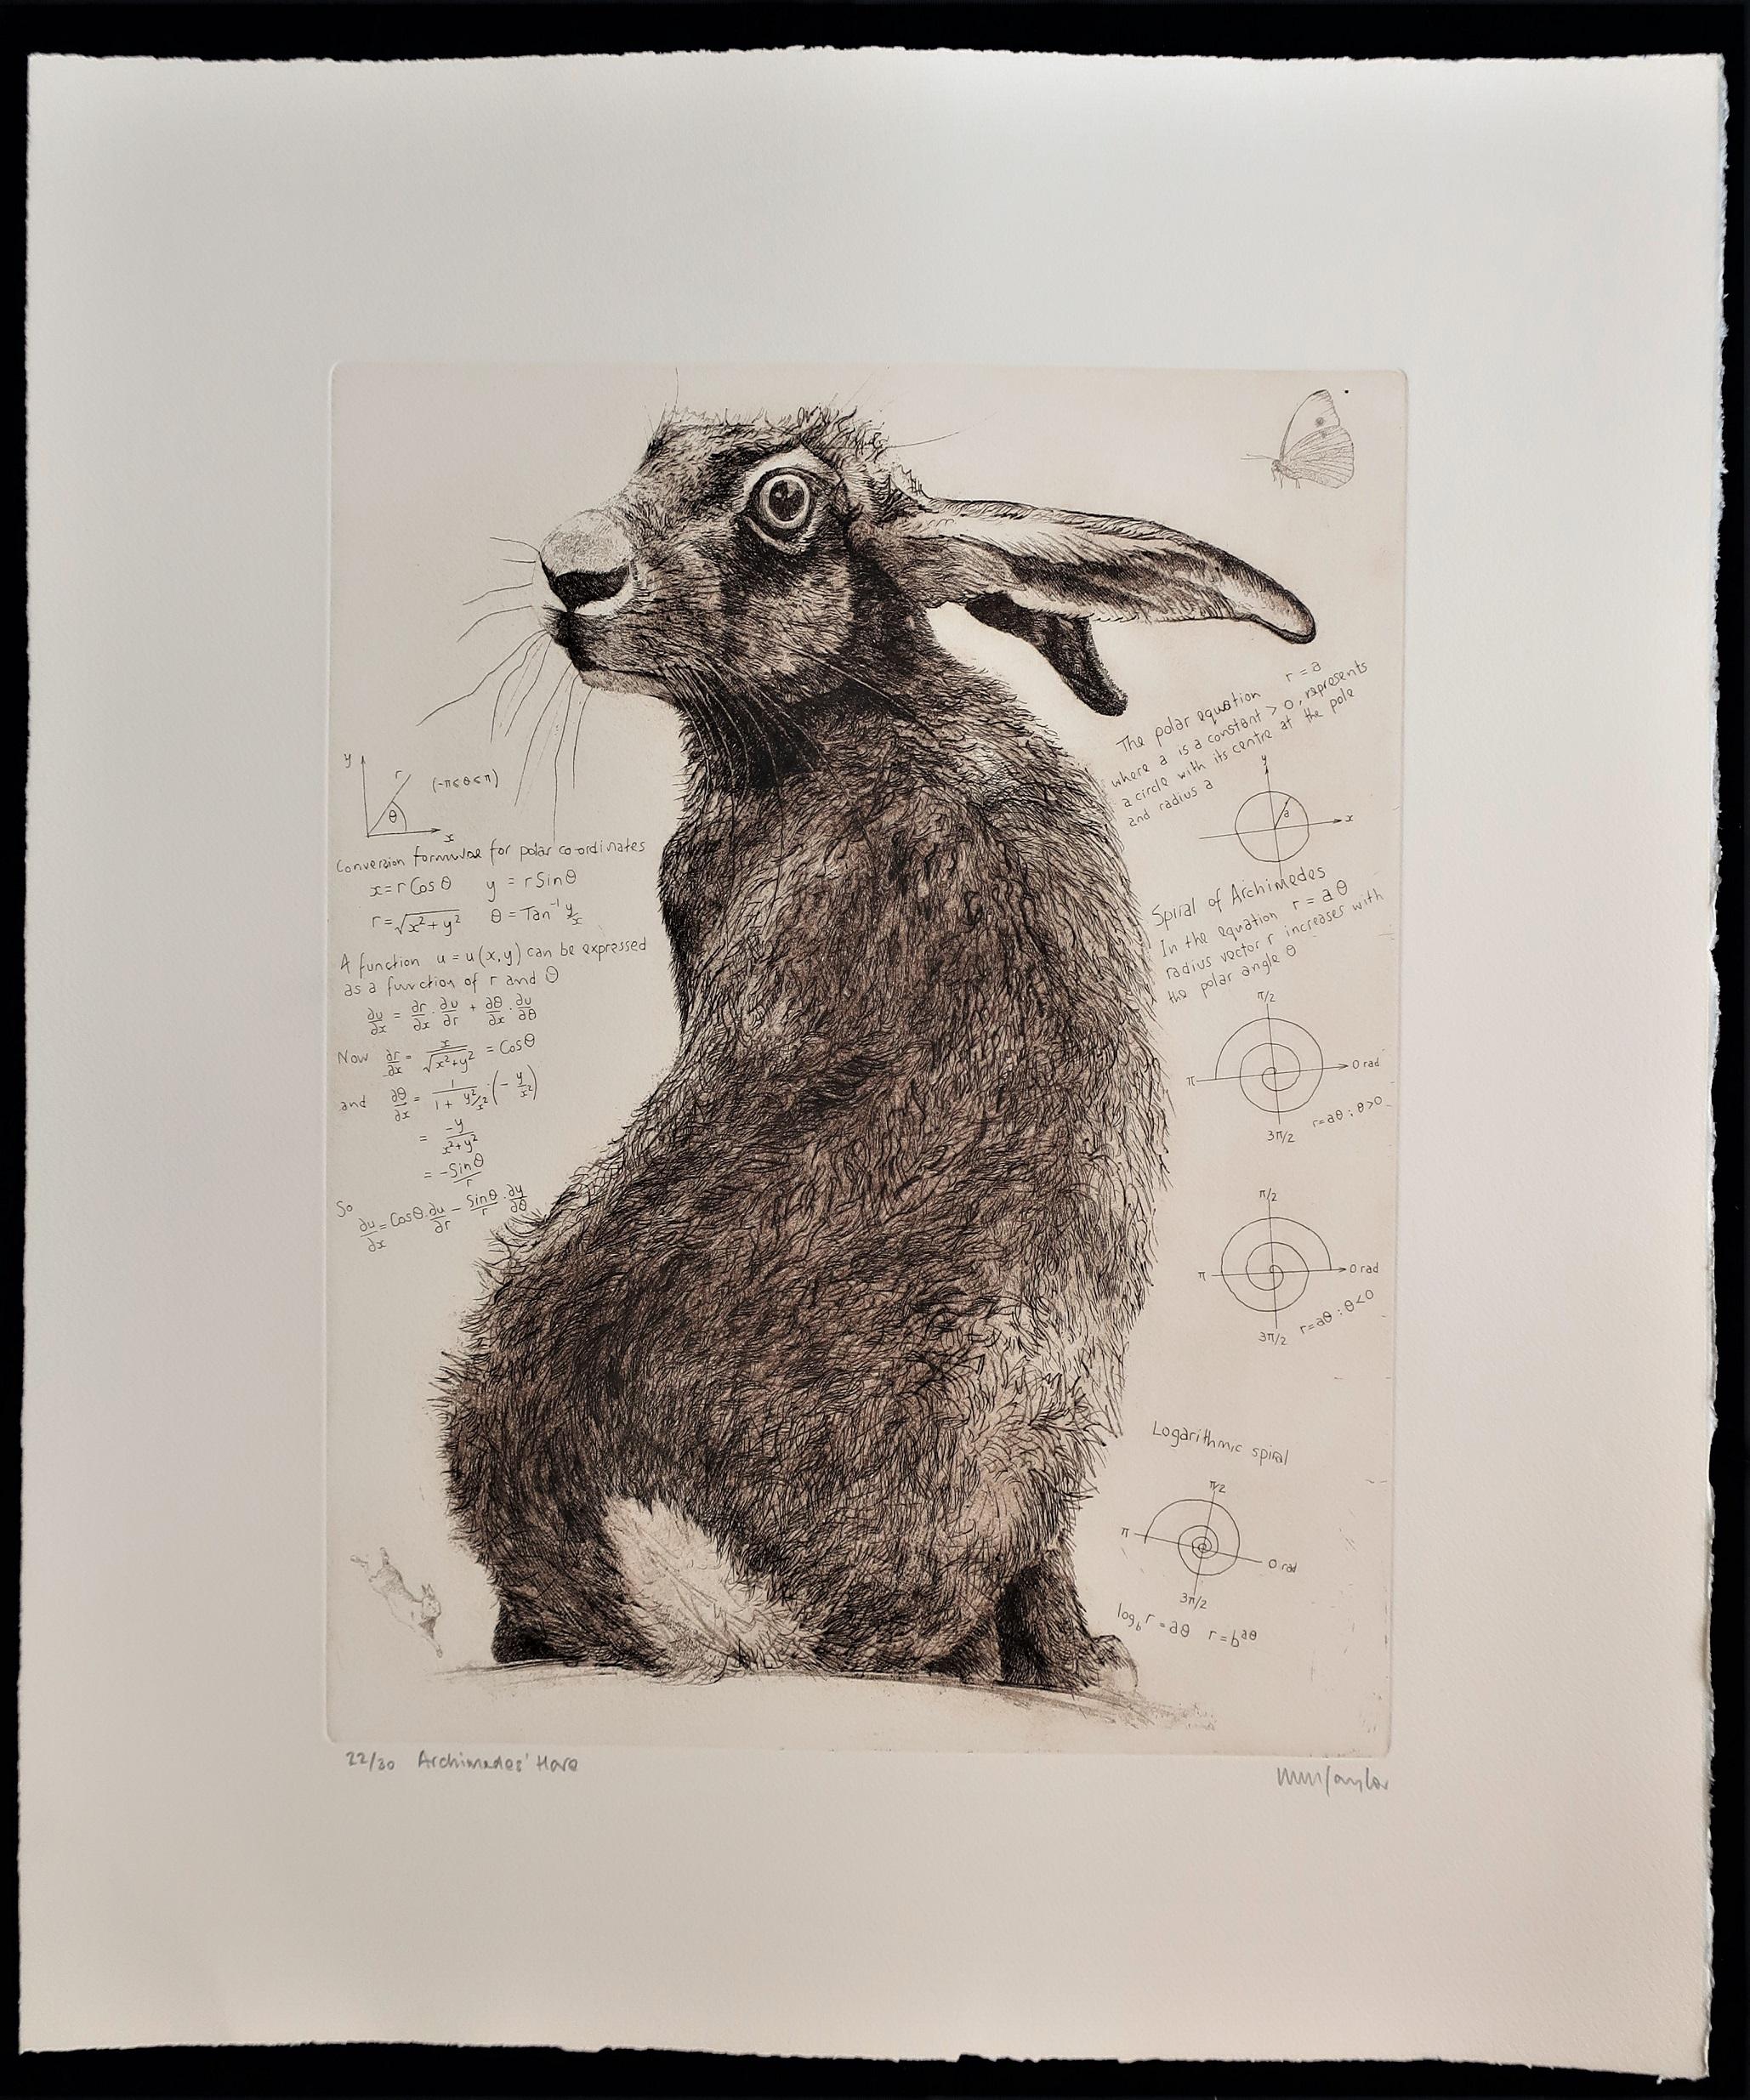 Will Taylor, Archimedes’ Hare, Animal Art, Affordable Art, Art Online For Sale 1